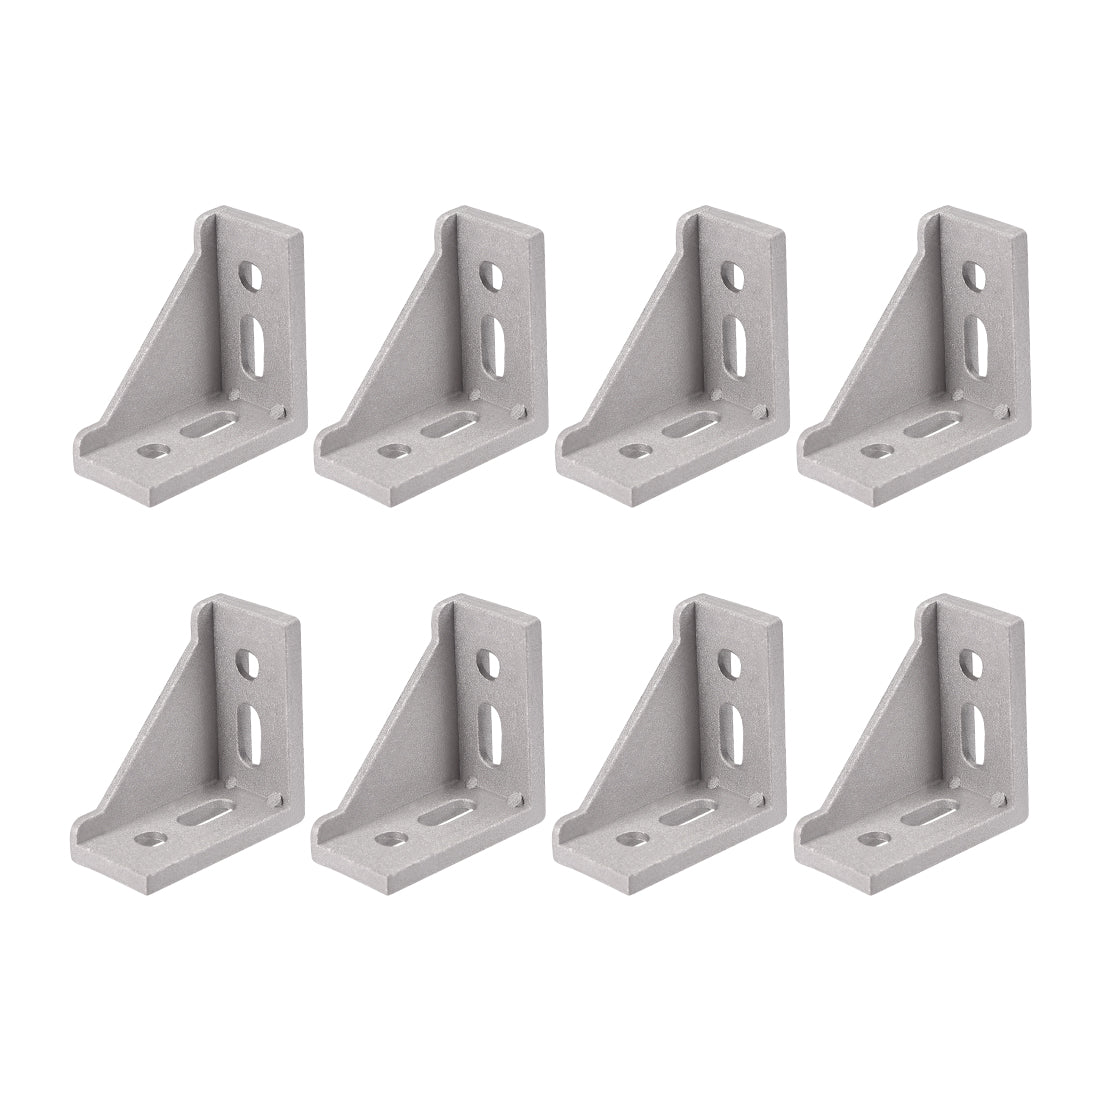 uxcell Uxcell Inside Corner Bracket Gusset, 60mm x 60mm for 3030 Series Aluminum Extrusion Profile with Slot 8mm, 8 Pcs (Silver)